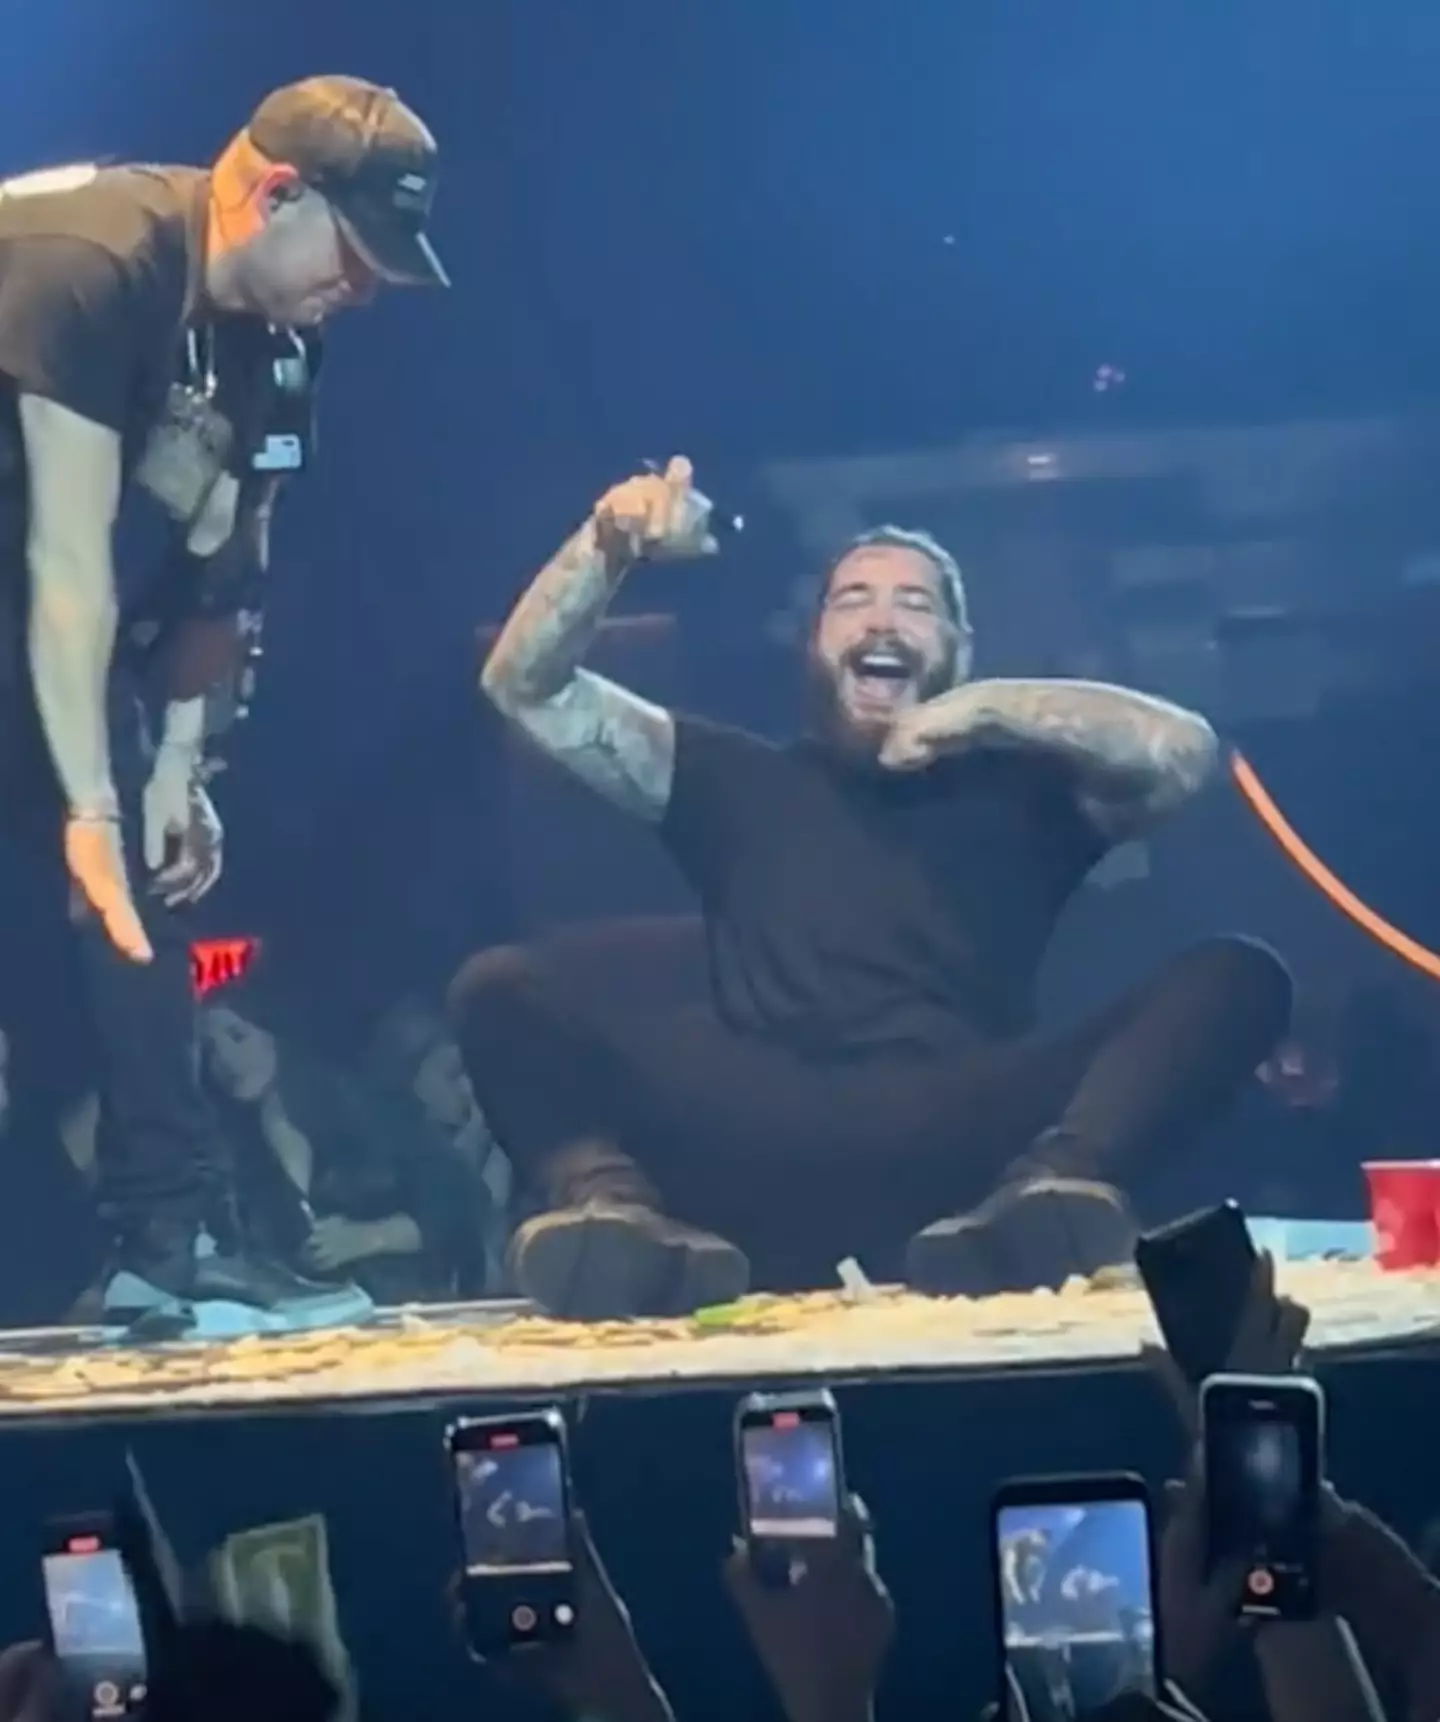 Post Malone did not want to move.